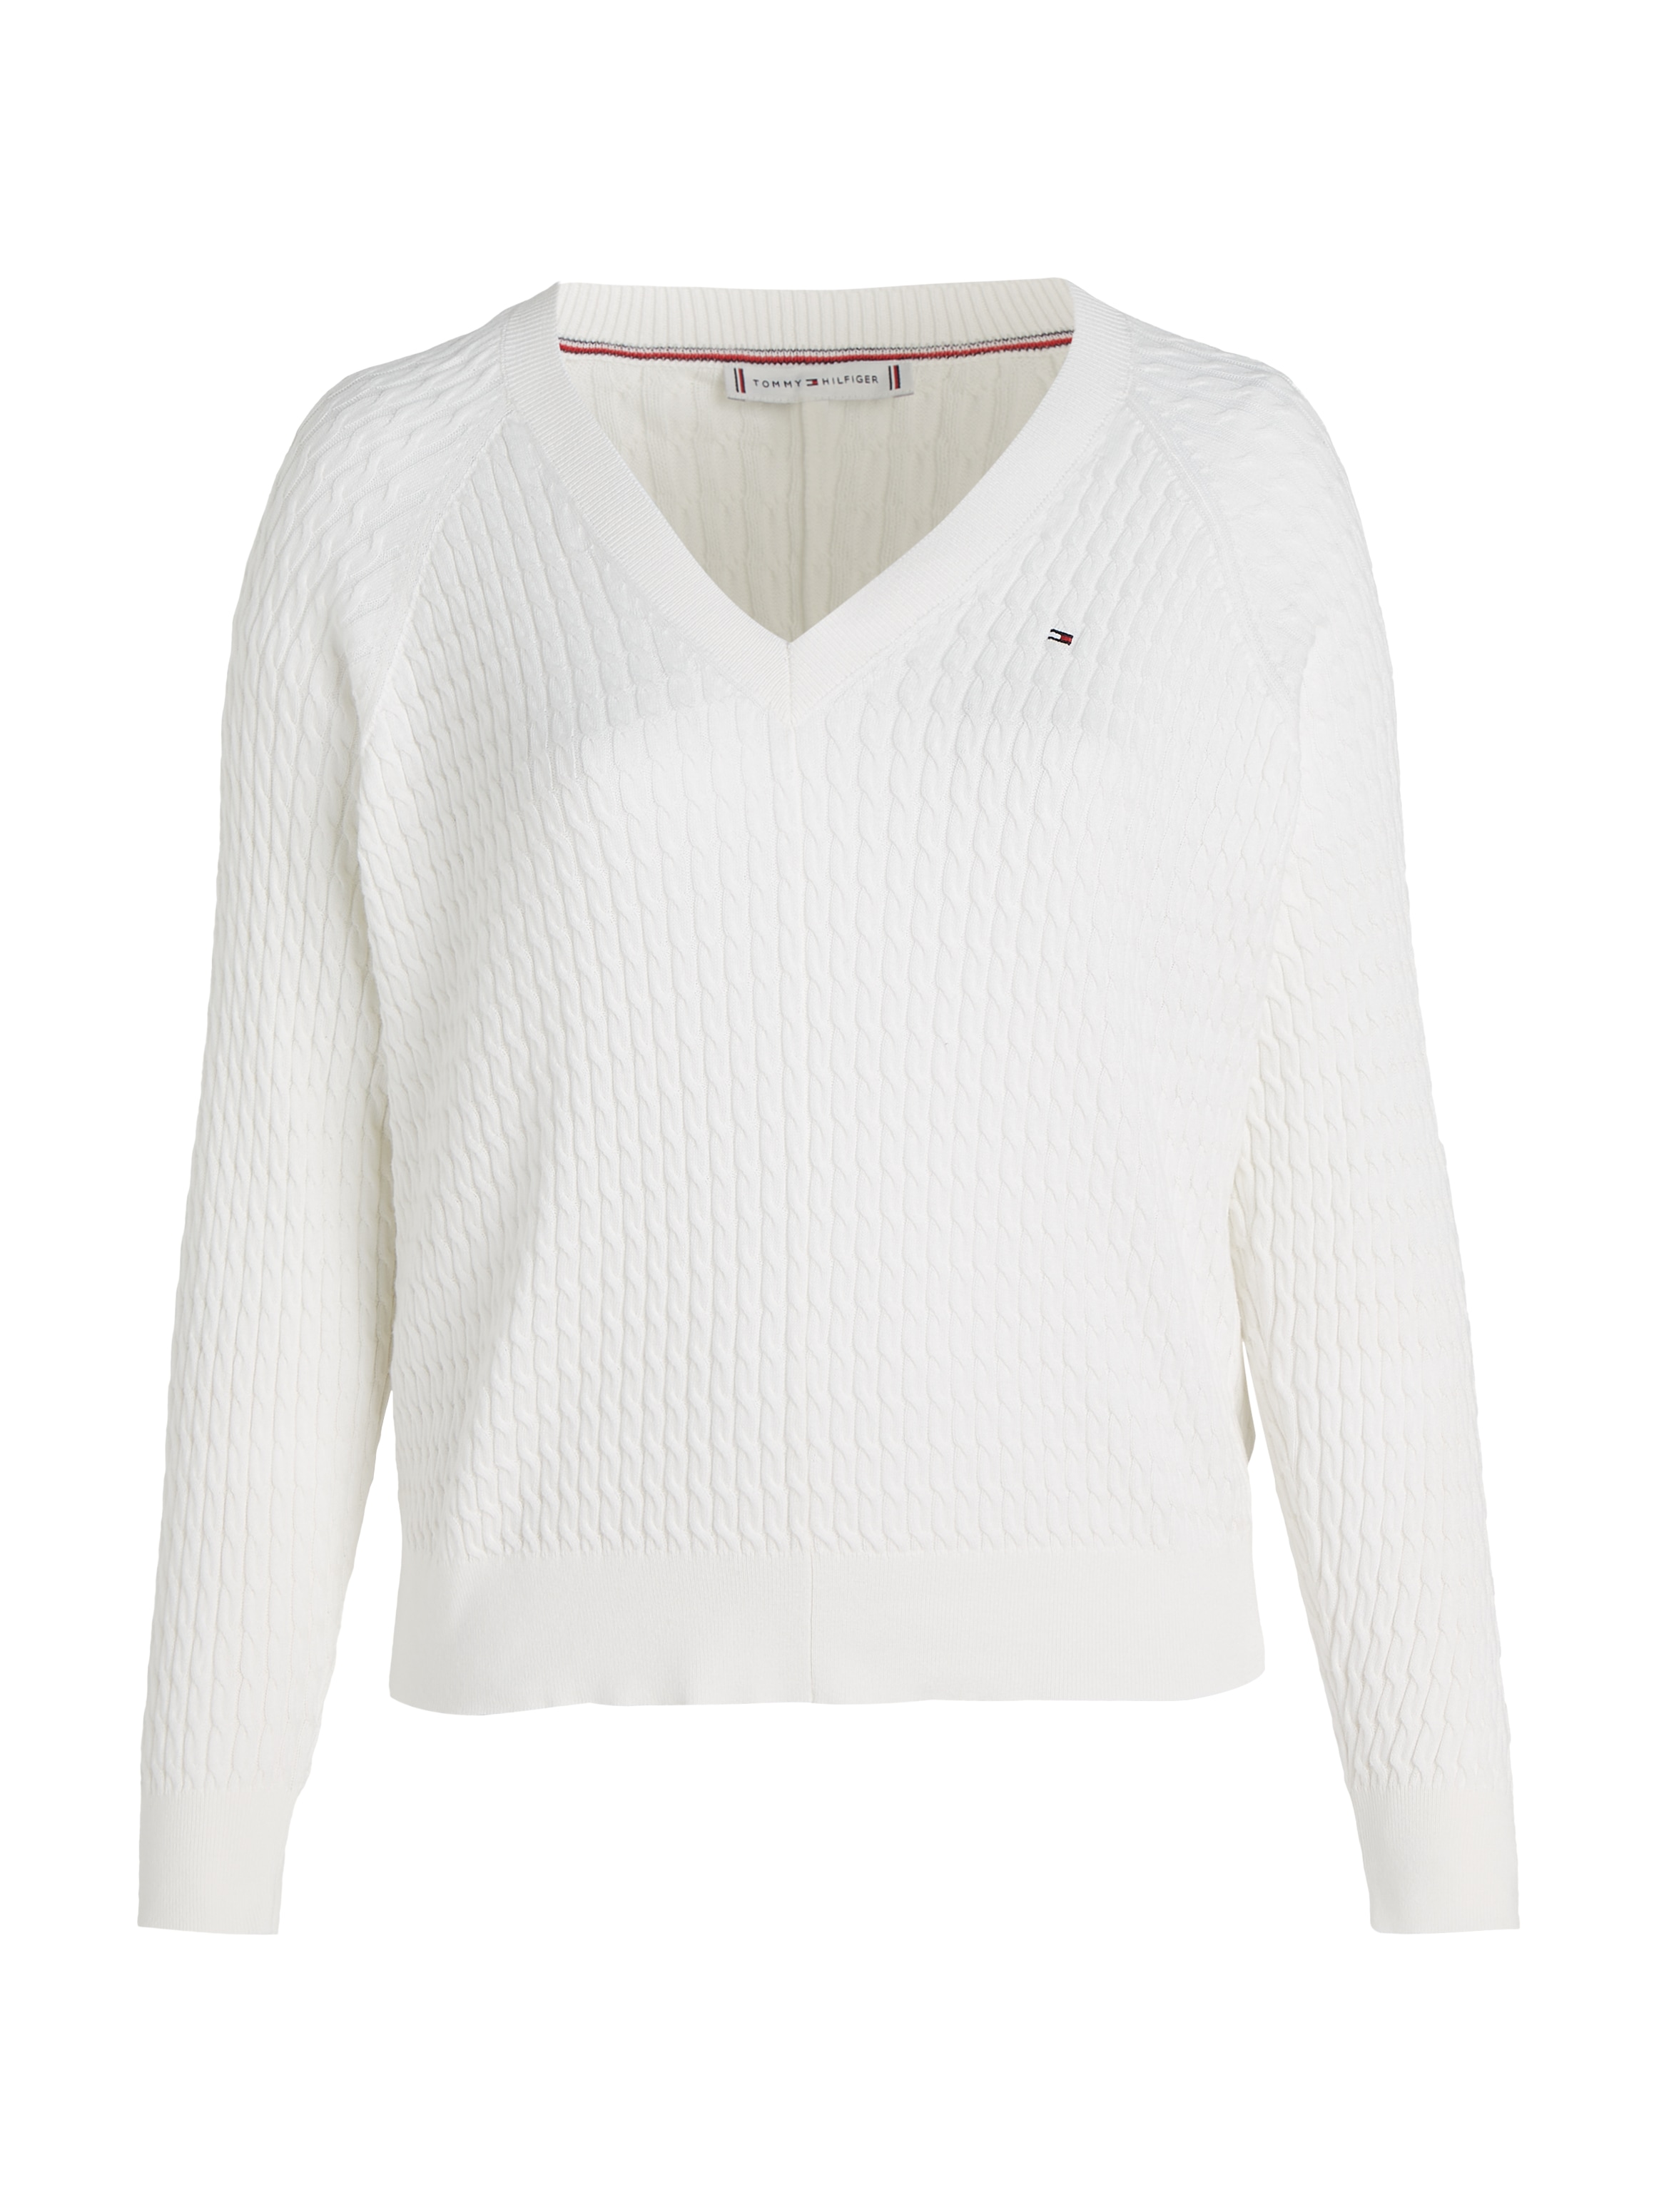 Tommy Hilfiger Curve »CRV online mit Logostickerei bei V-NK OTTO SWEATER«, CO CABLE V-Ausschnitt-Pullover